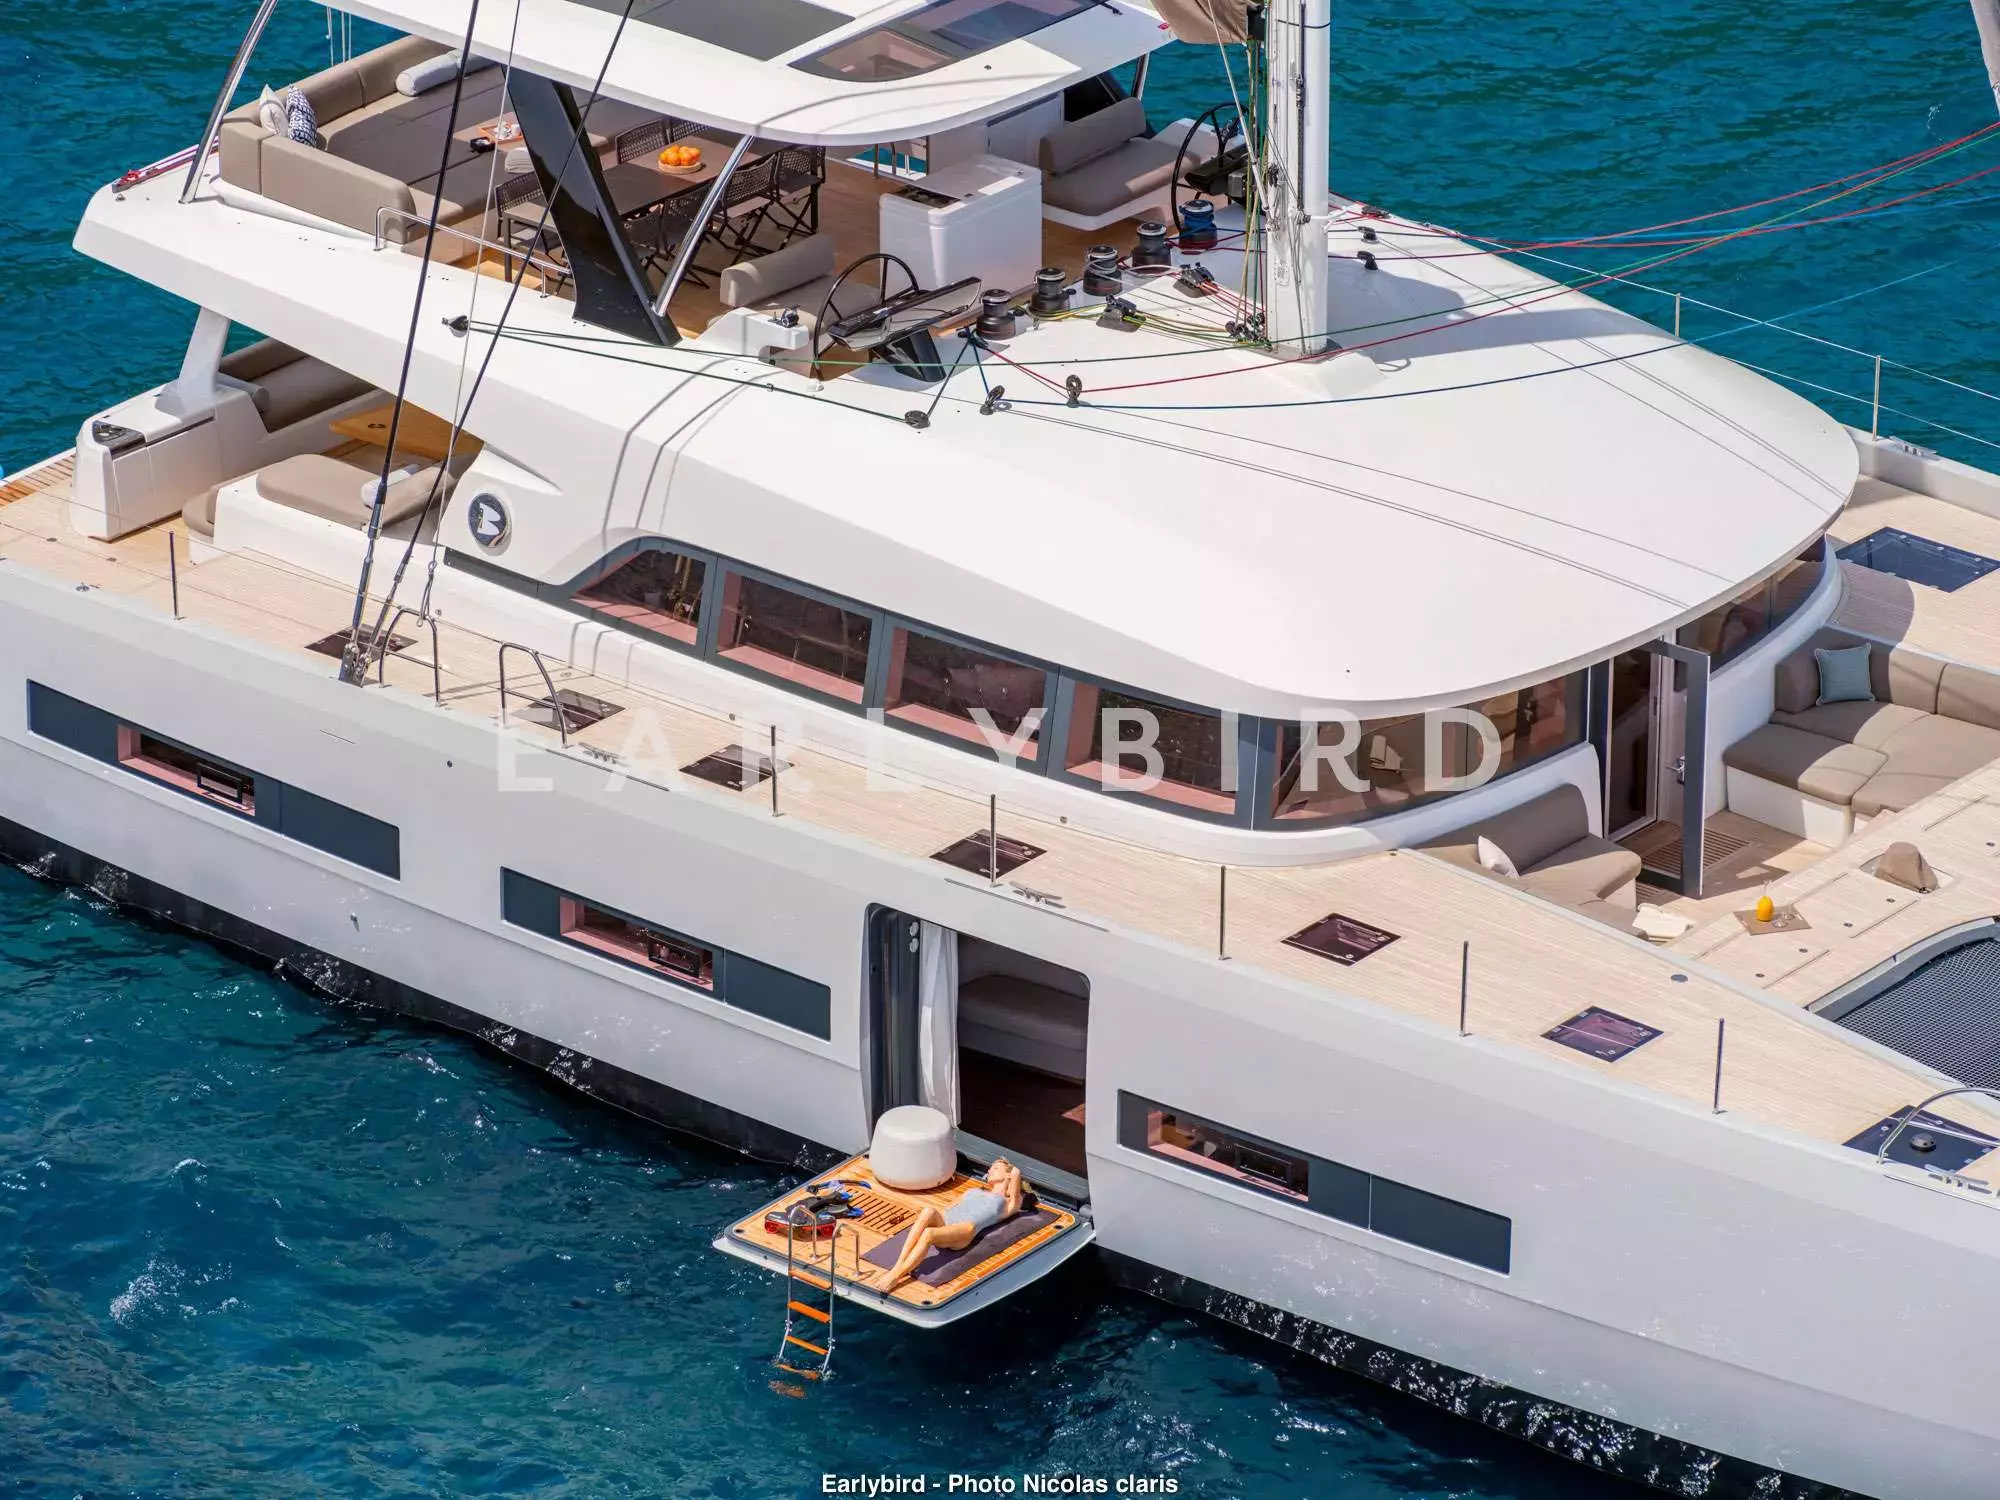 Earlybird by Lagoon - Top rates for a Charter of a private Luxury Catamaran in Antigua and Barbuda